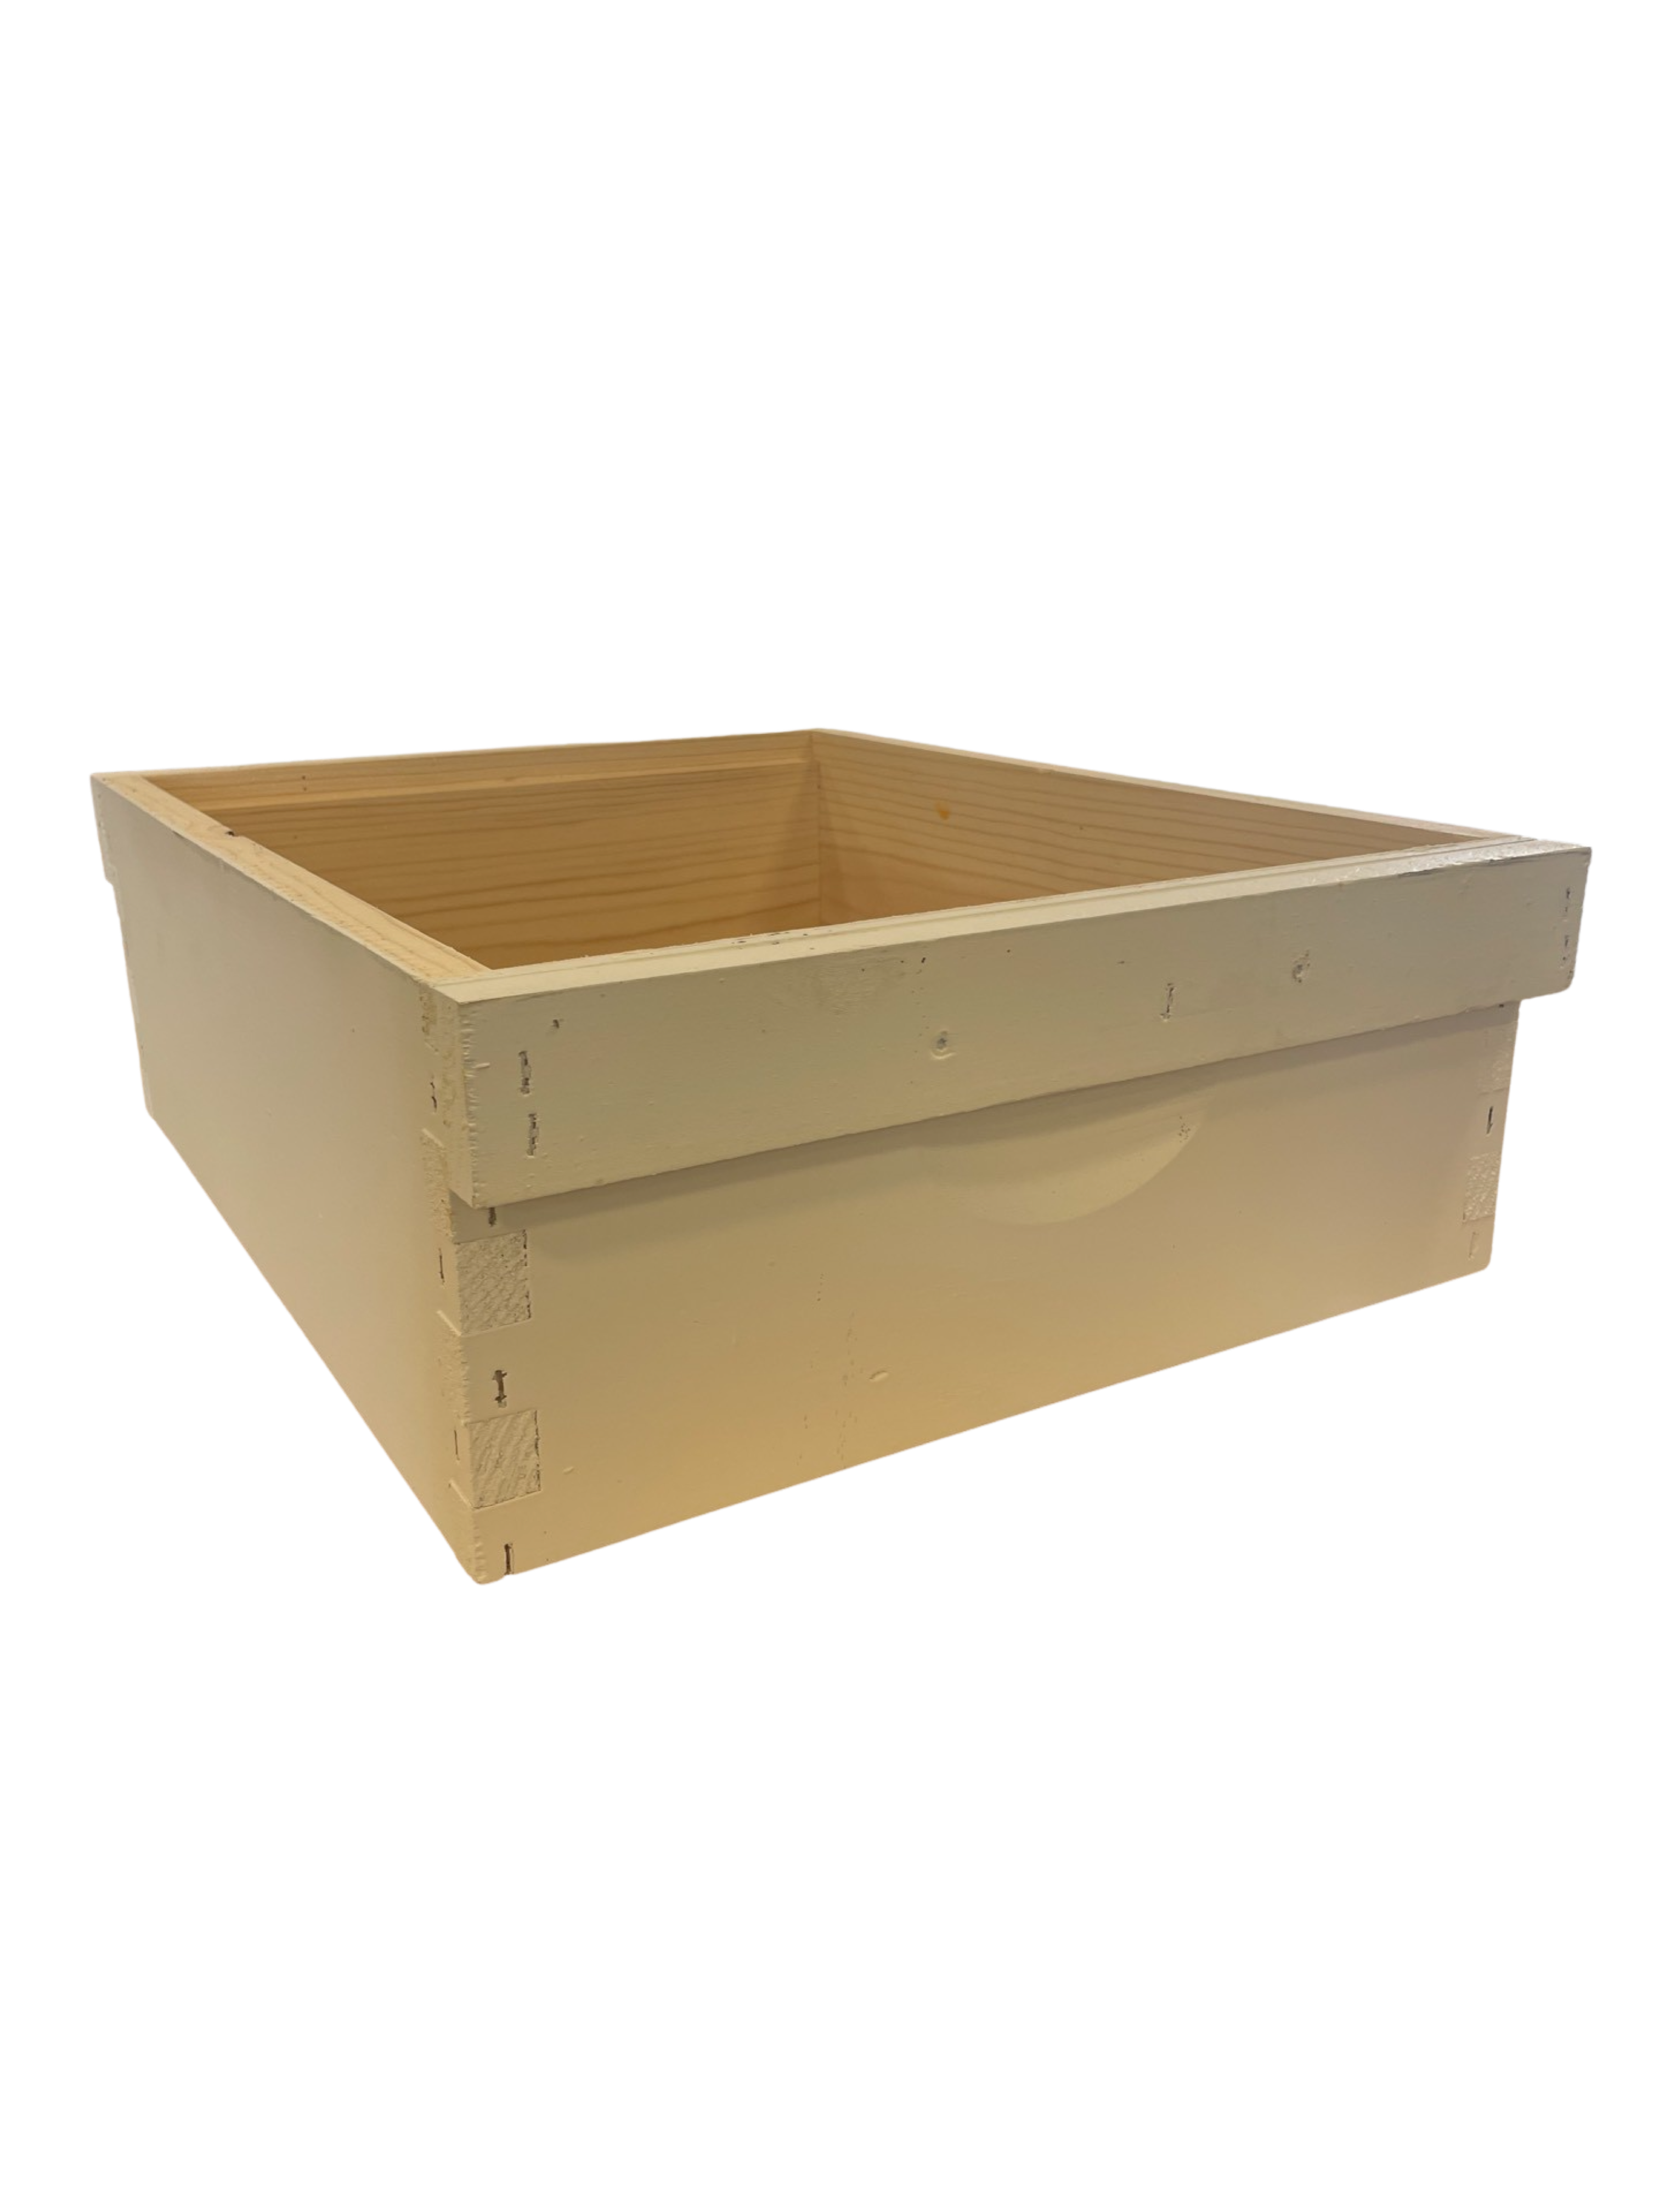 Shallow (6 5/8") Hive Box  | Cleated | Painted